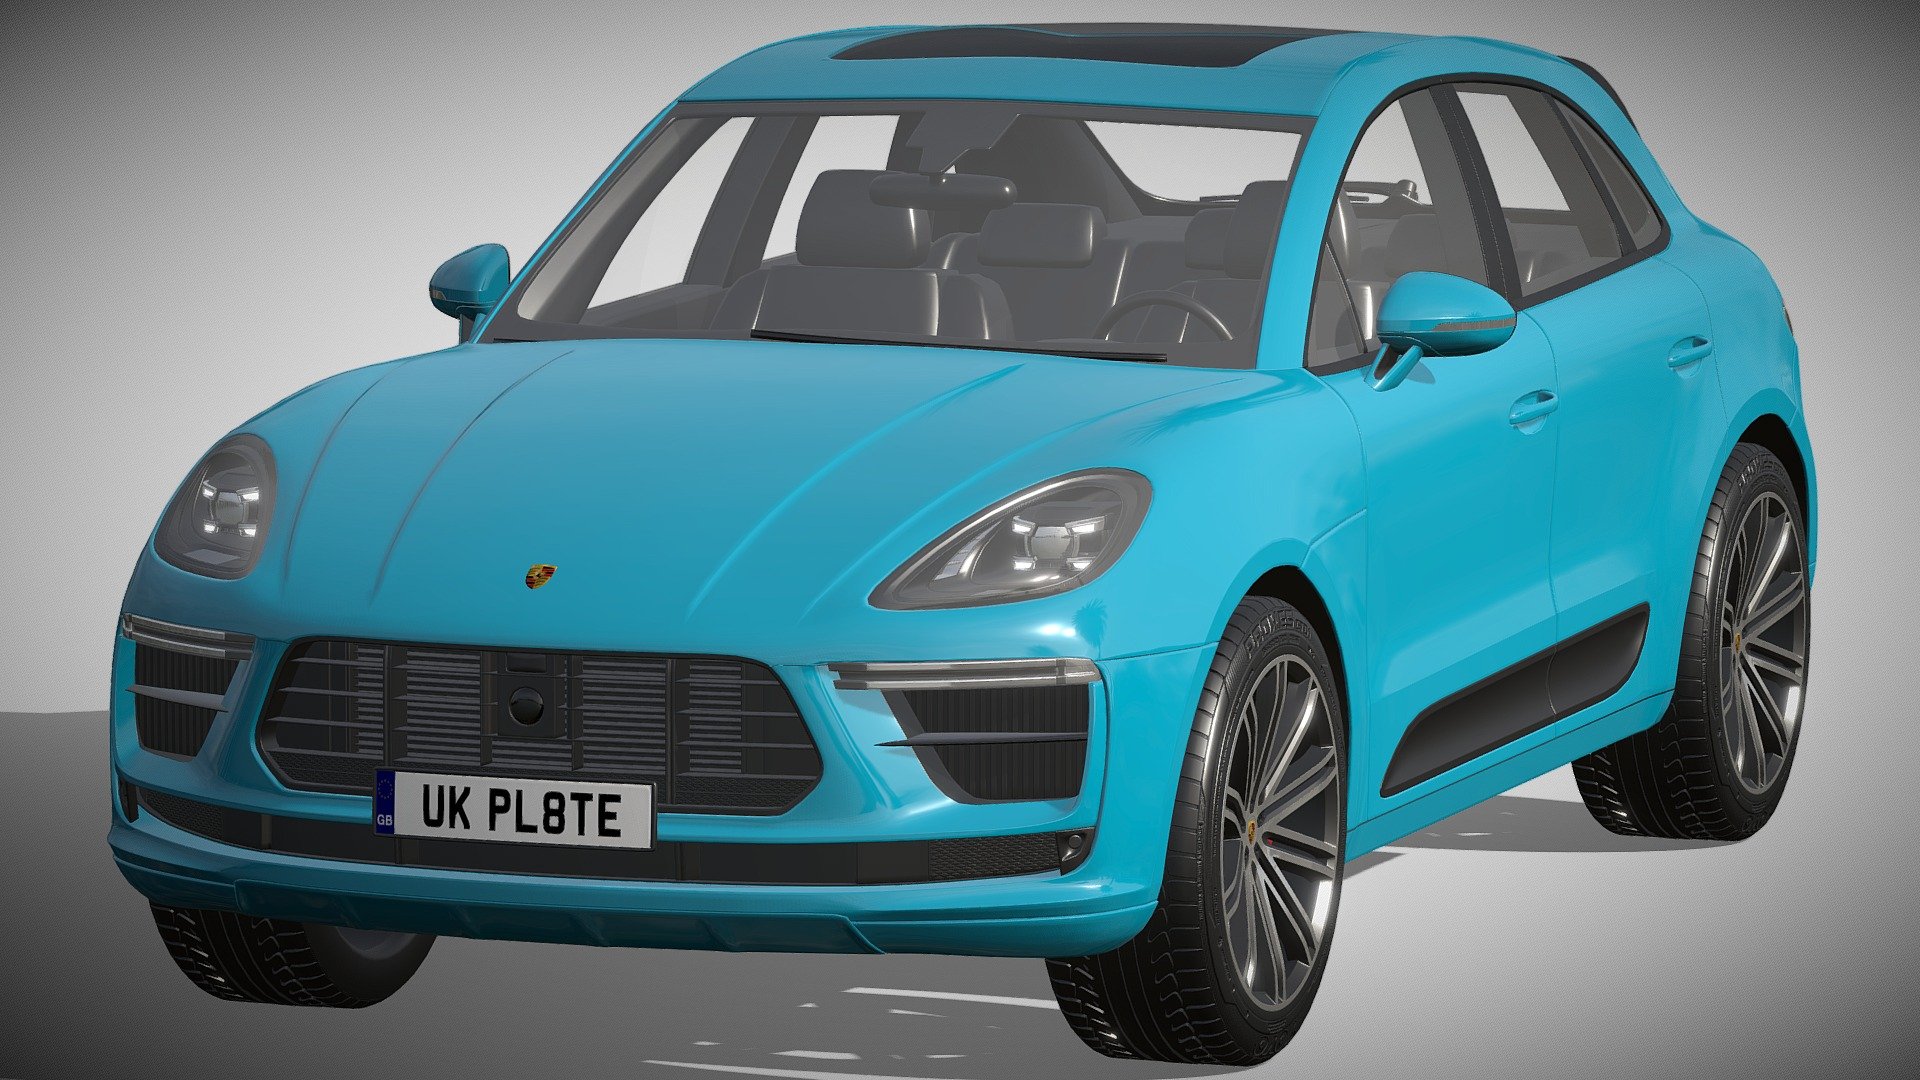 Porsche Macan Turbo 2020

https://www.porsche.com/usa/models/macan/macan-models/macan-turbo/

Clean geometry Light weight model, yet completely detailed for HI-Res renders. Use for movies, Advertisements or games

Corona render and materials

All textures include in *.rar files

Lighting setup is not included in the file! - Porsche Macan Turbo 2020 - Buy Royalty Free 3D model by zifir3d 3d model